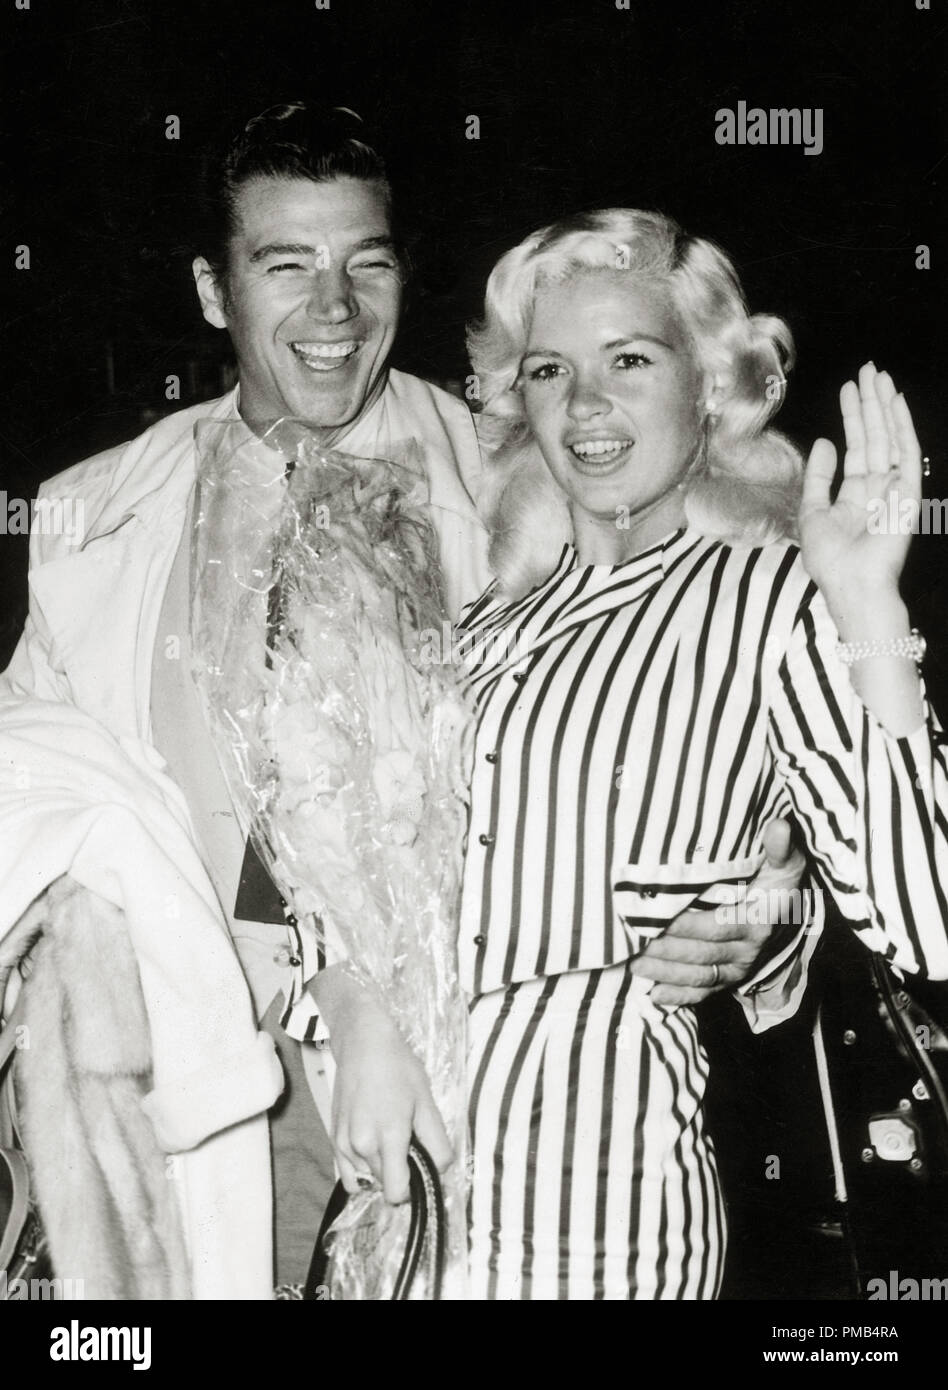 Jayne Mansfield, with her husband Mickey Hargitay, circa 1960 File Reference # 33371 351THA Stock Photo